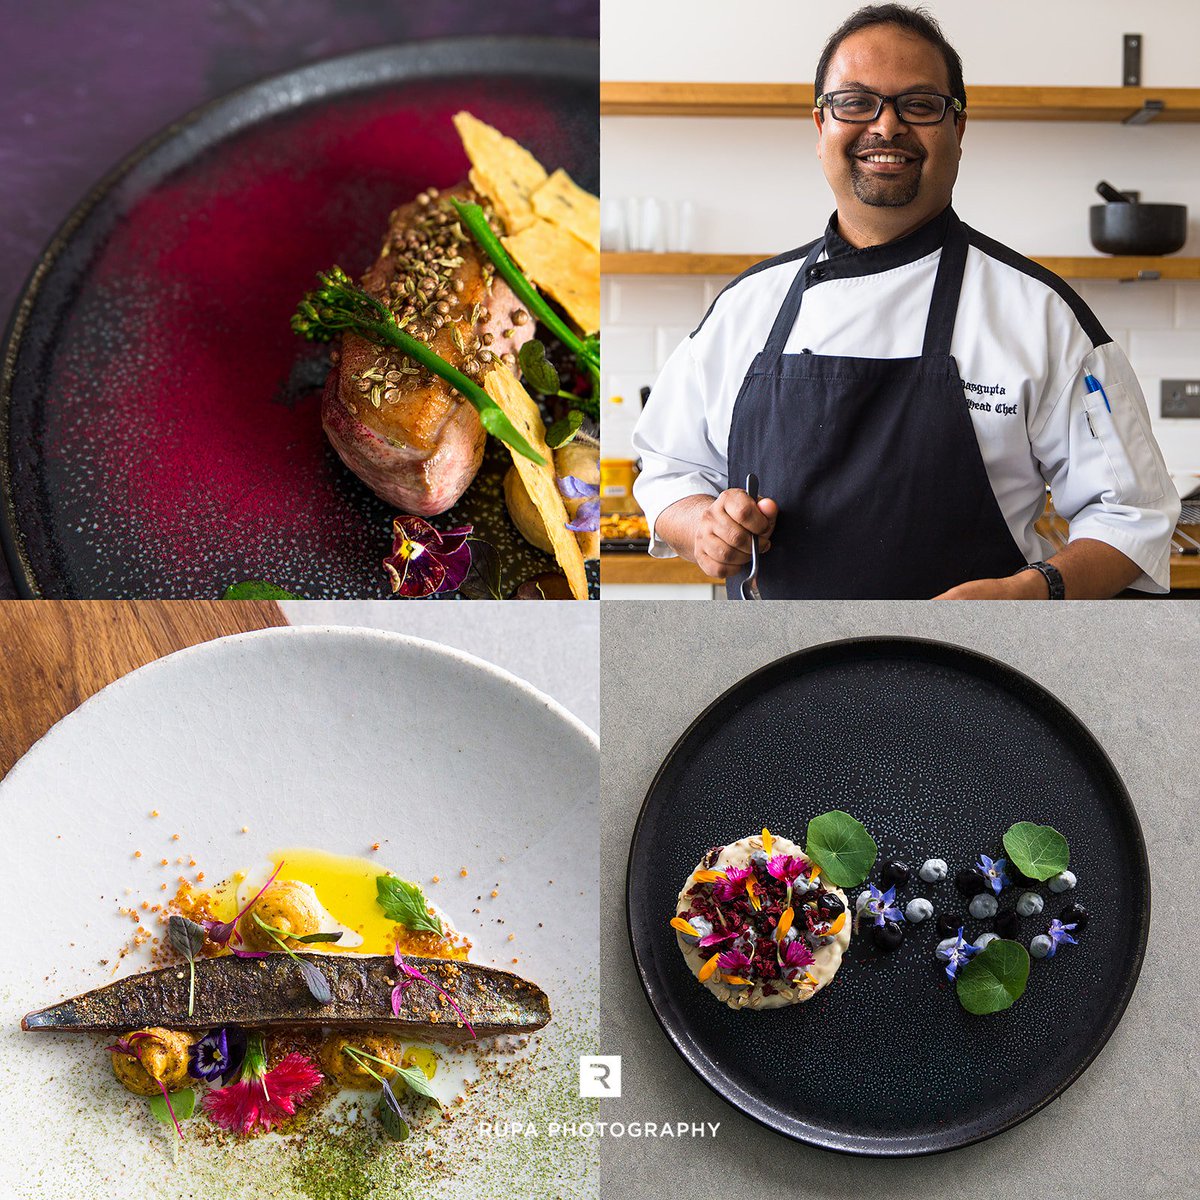 An incredible day last week  at #ChefsSocial with  #NCSupperClubs #chefarup @RupaPhoto @foody12mandy #tabletopmatters #londonpopups #londonfoodie #finedininglover #finedining
#foodporn #foodphotography